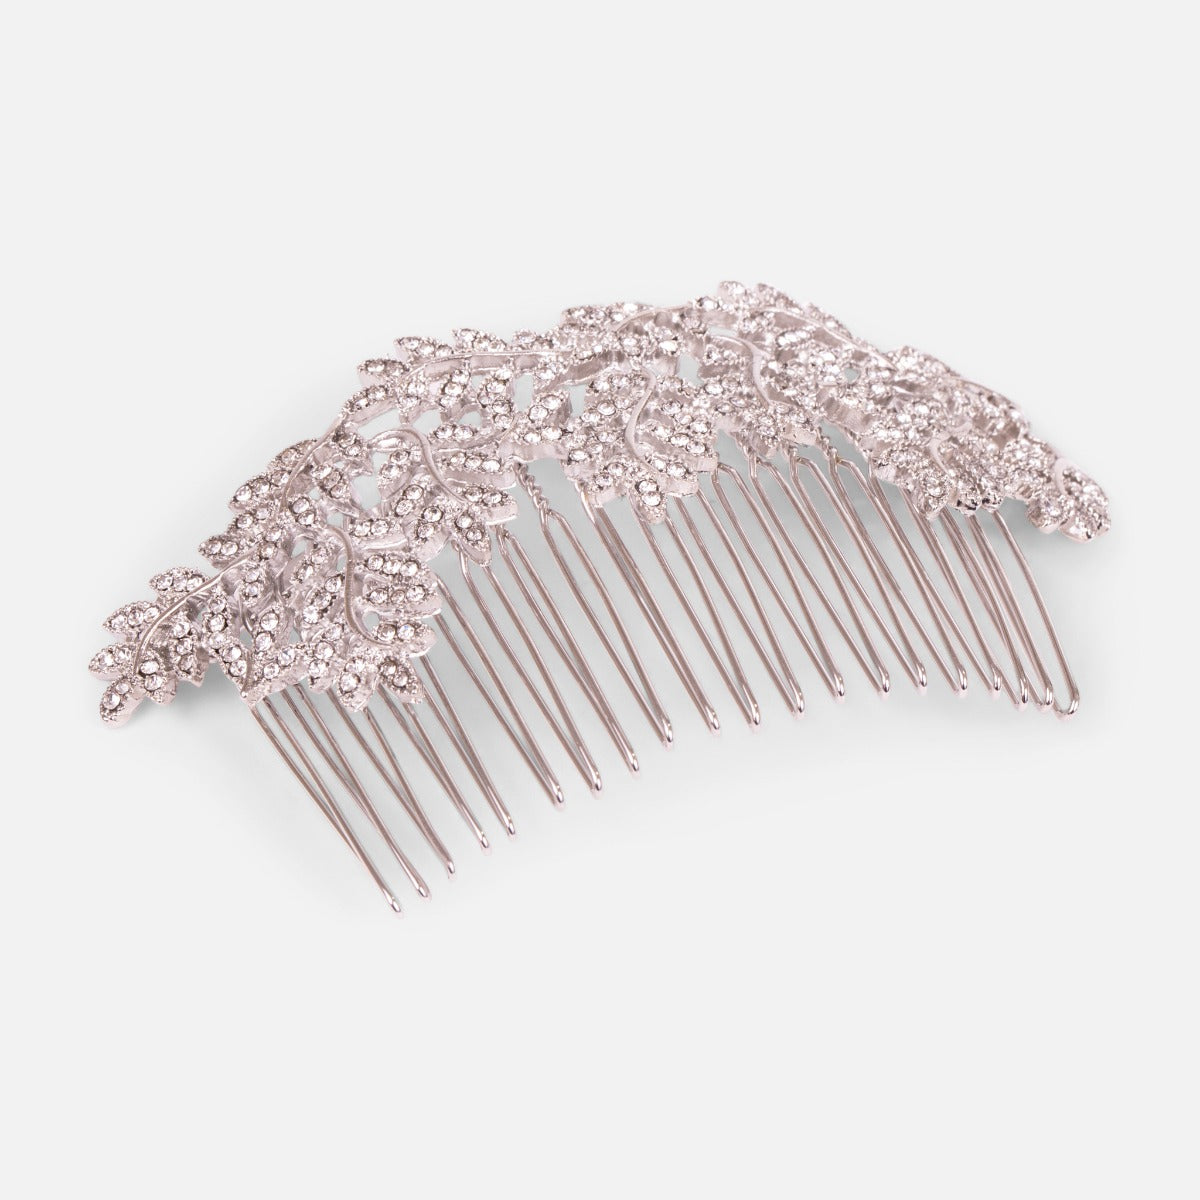 Decorative silvered comb with leaf ornaments